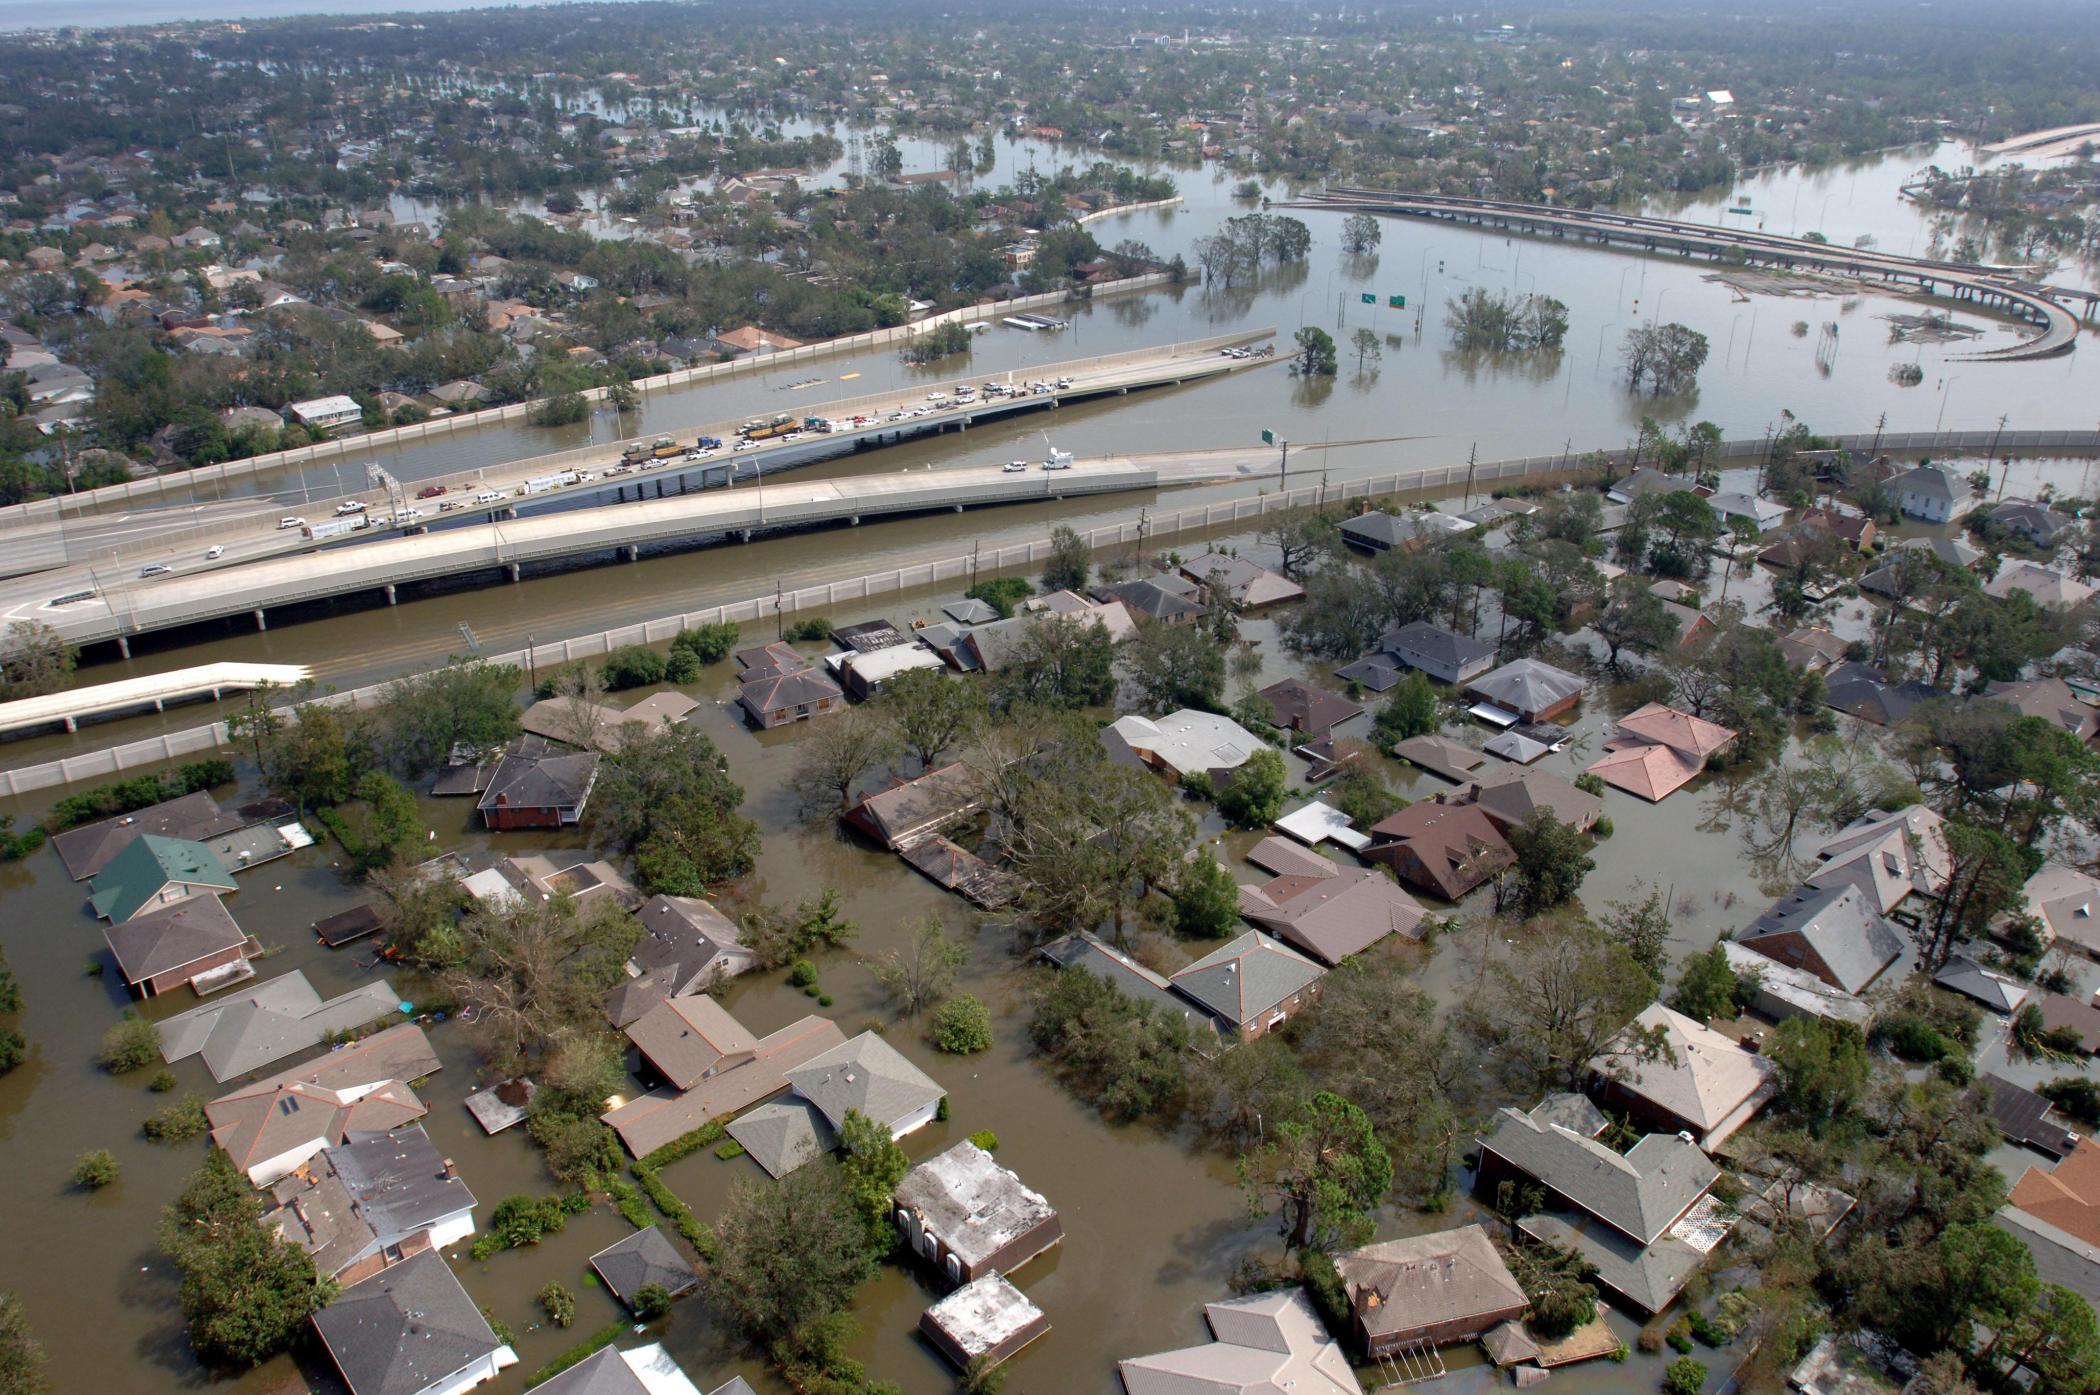 Flooded houses and highway, with flyover bridges emerging from floodwaters, shown from above, horizon in the distance